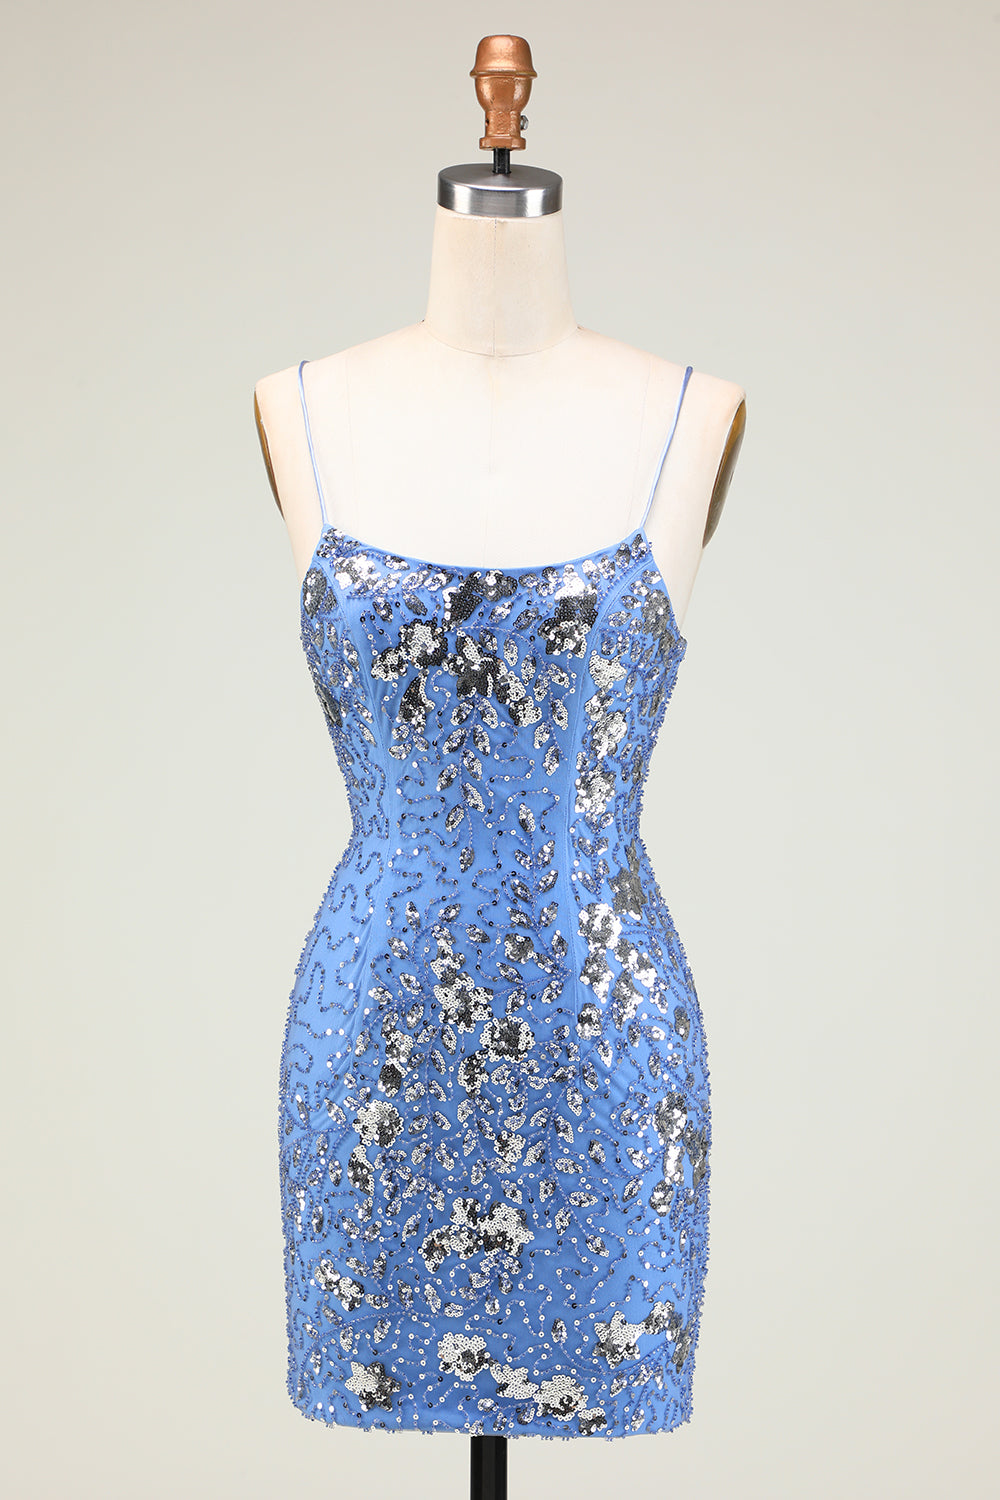 Sparkly Sheath Grey Blue Sequins Cocktail Dress with Criss Cross Back